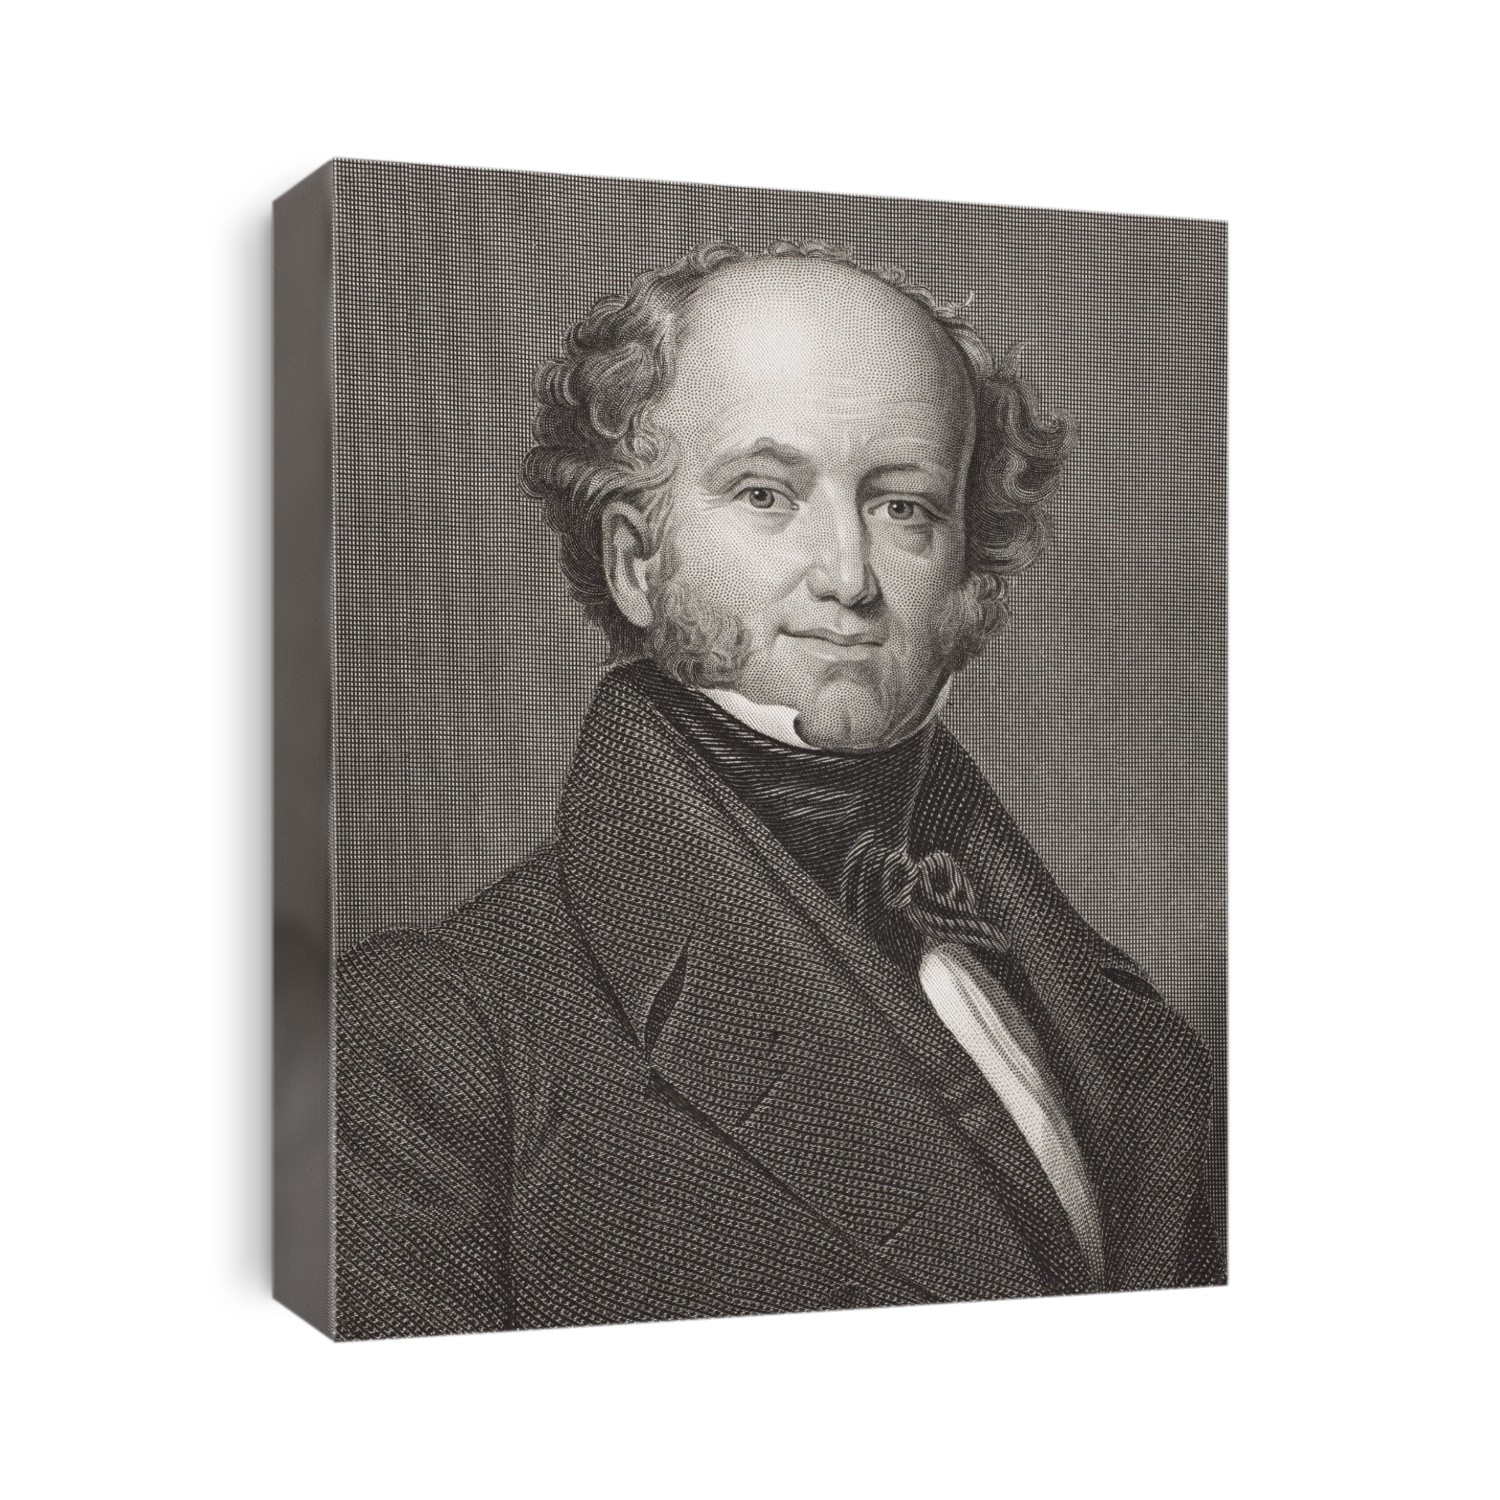 Martin Van Buren 1782 - 1862. 8Th President Of The United States. From The Book Gallery Of Historical Portraits Published C.1880.